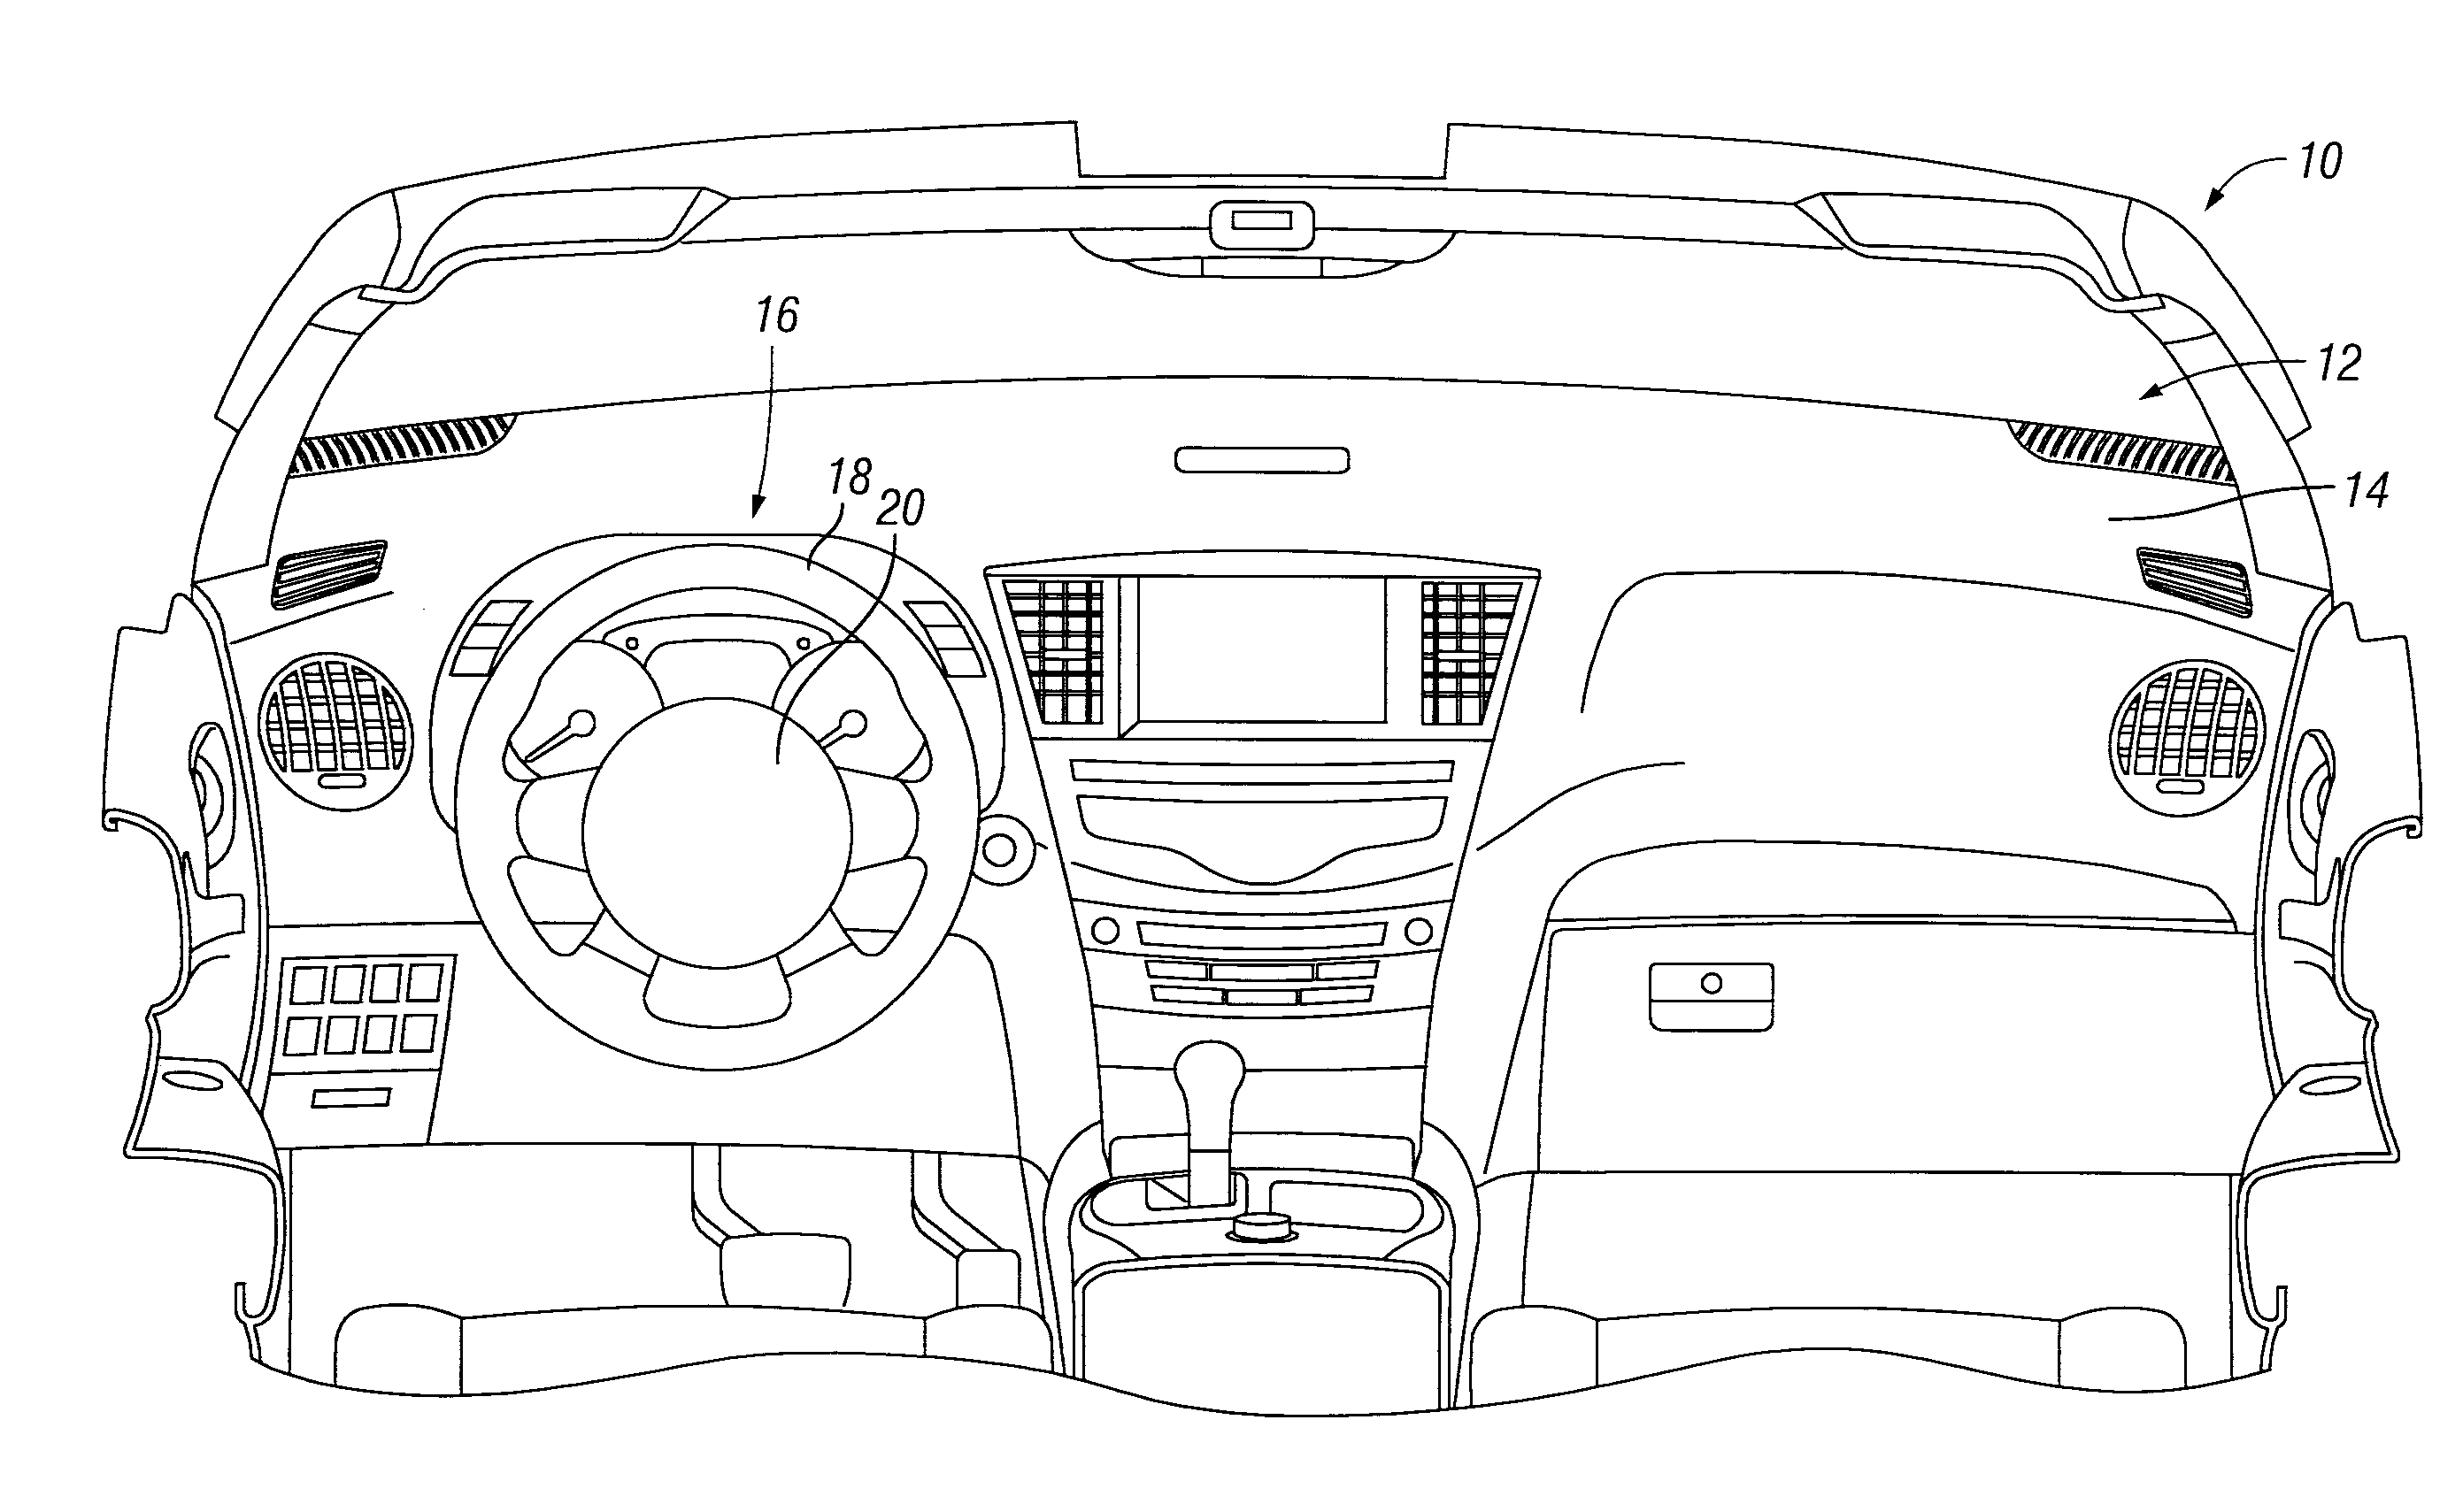 Vehicle horn control assembly